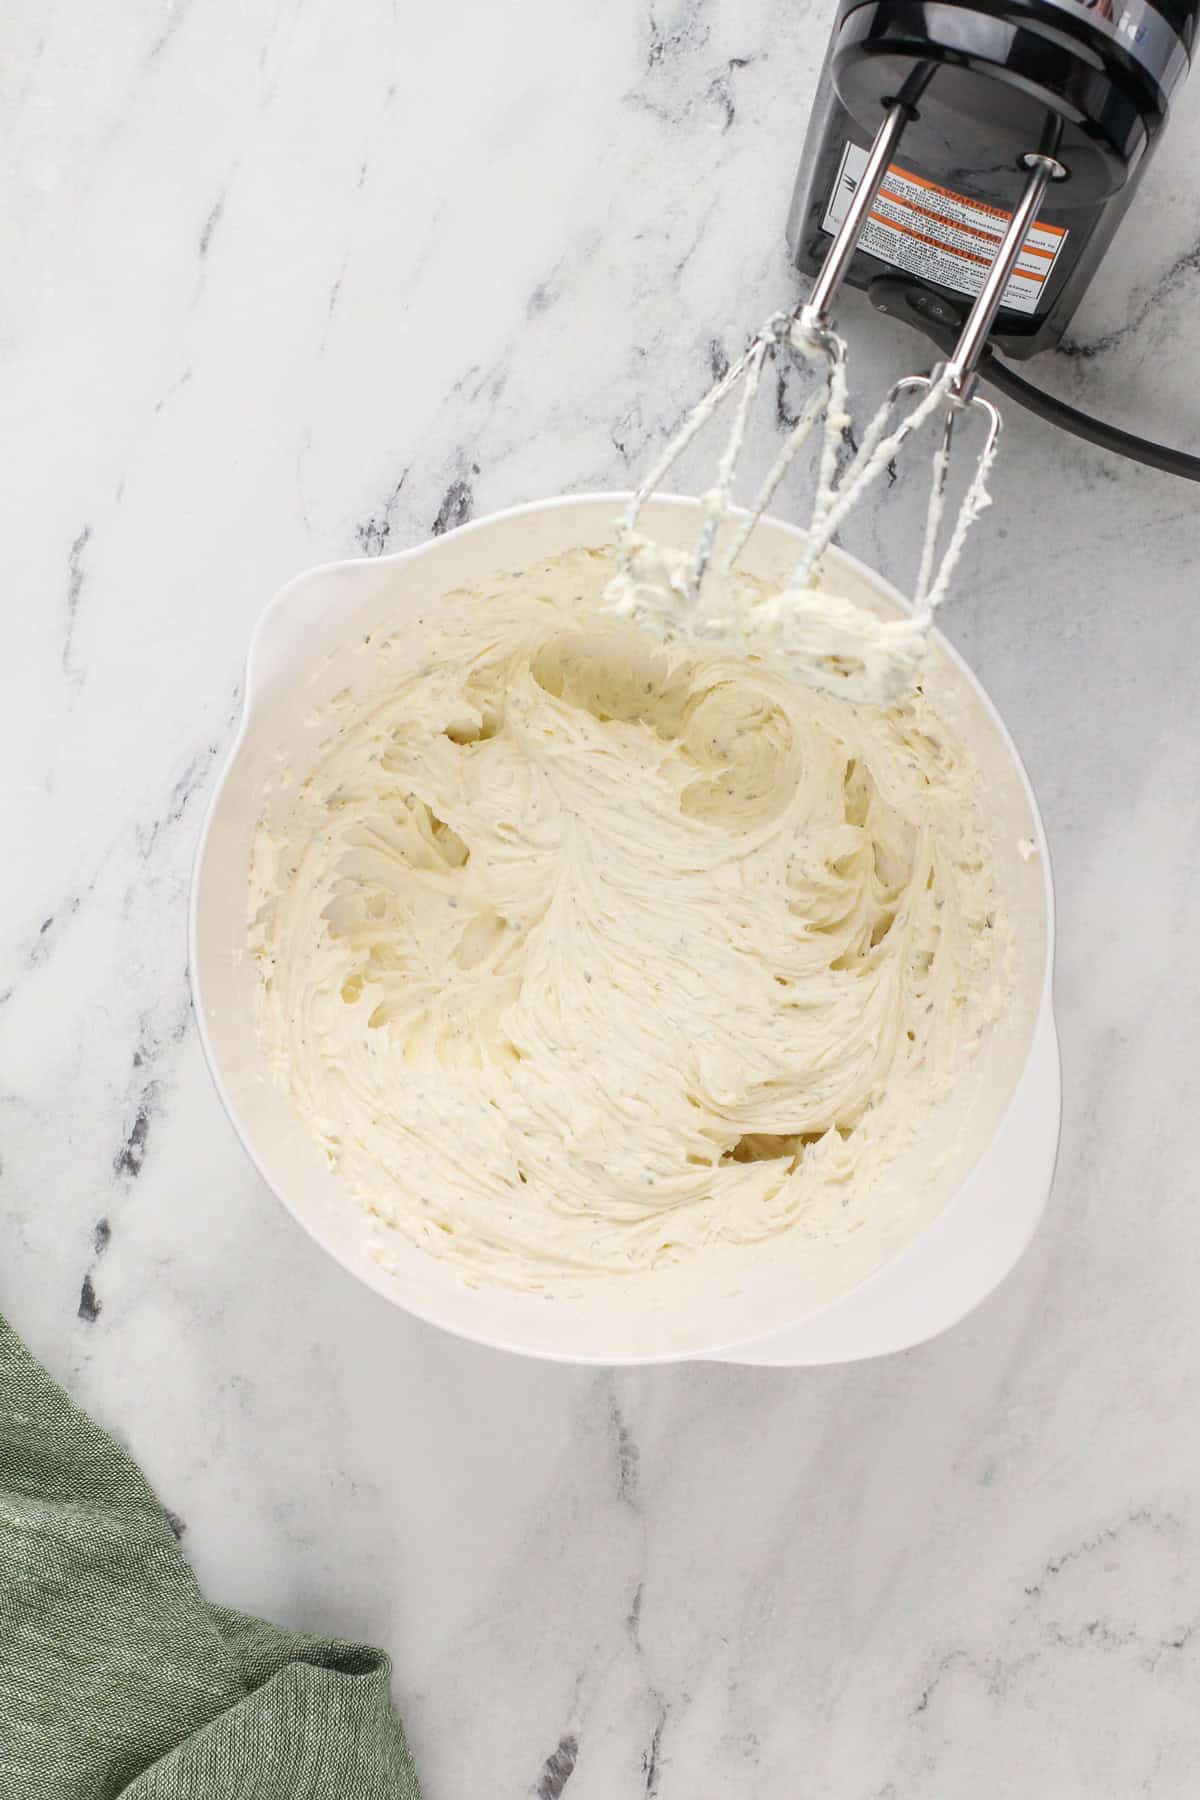 Cream cheese whipped with a mixer in a white bowl.